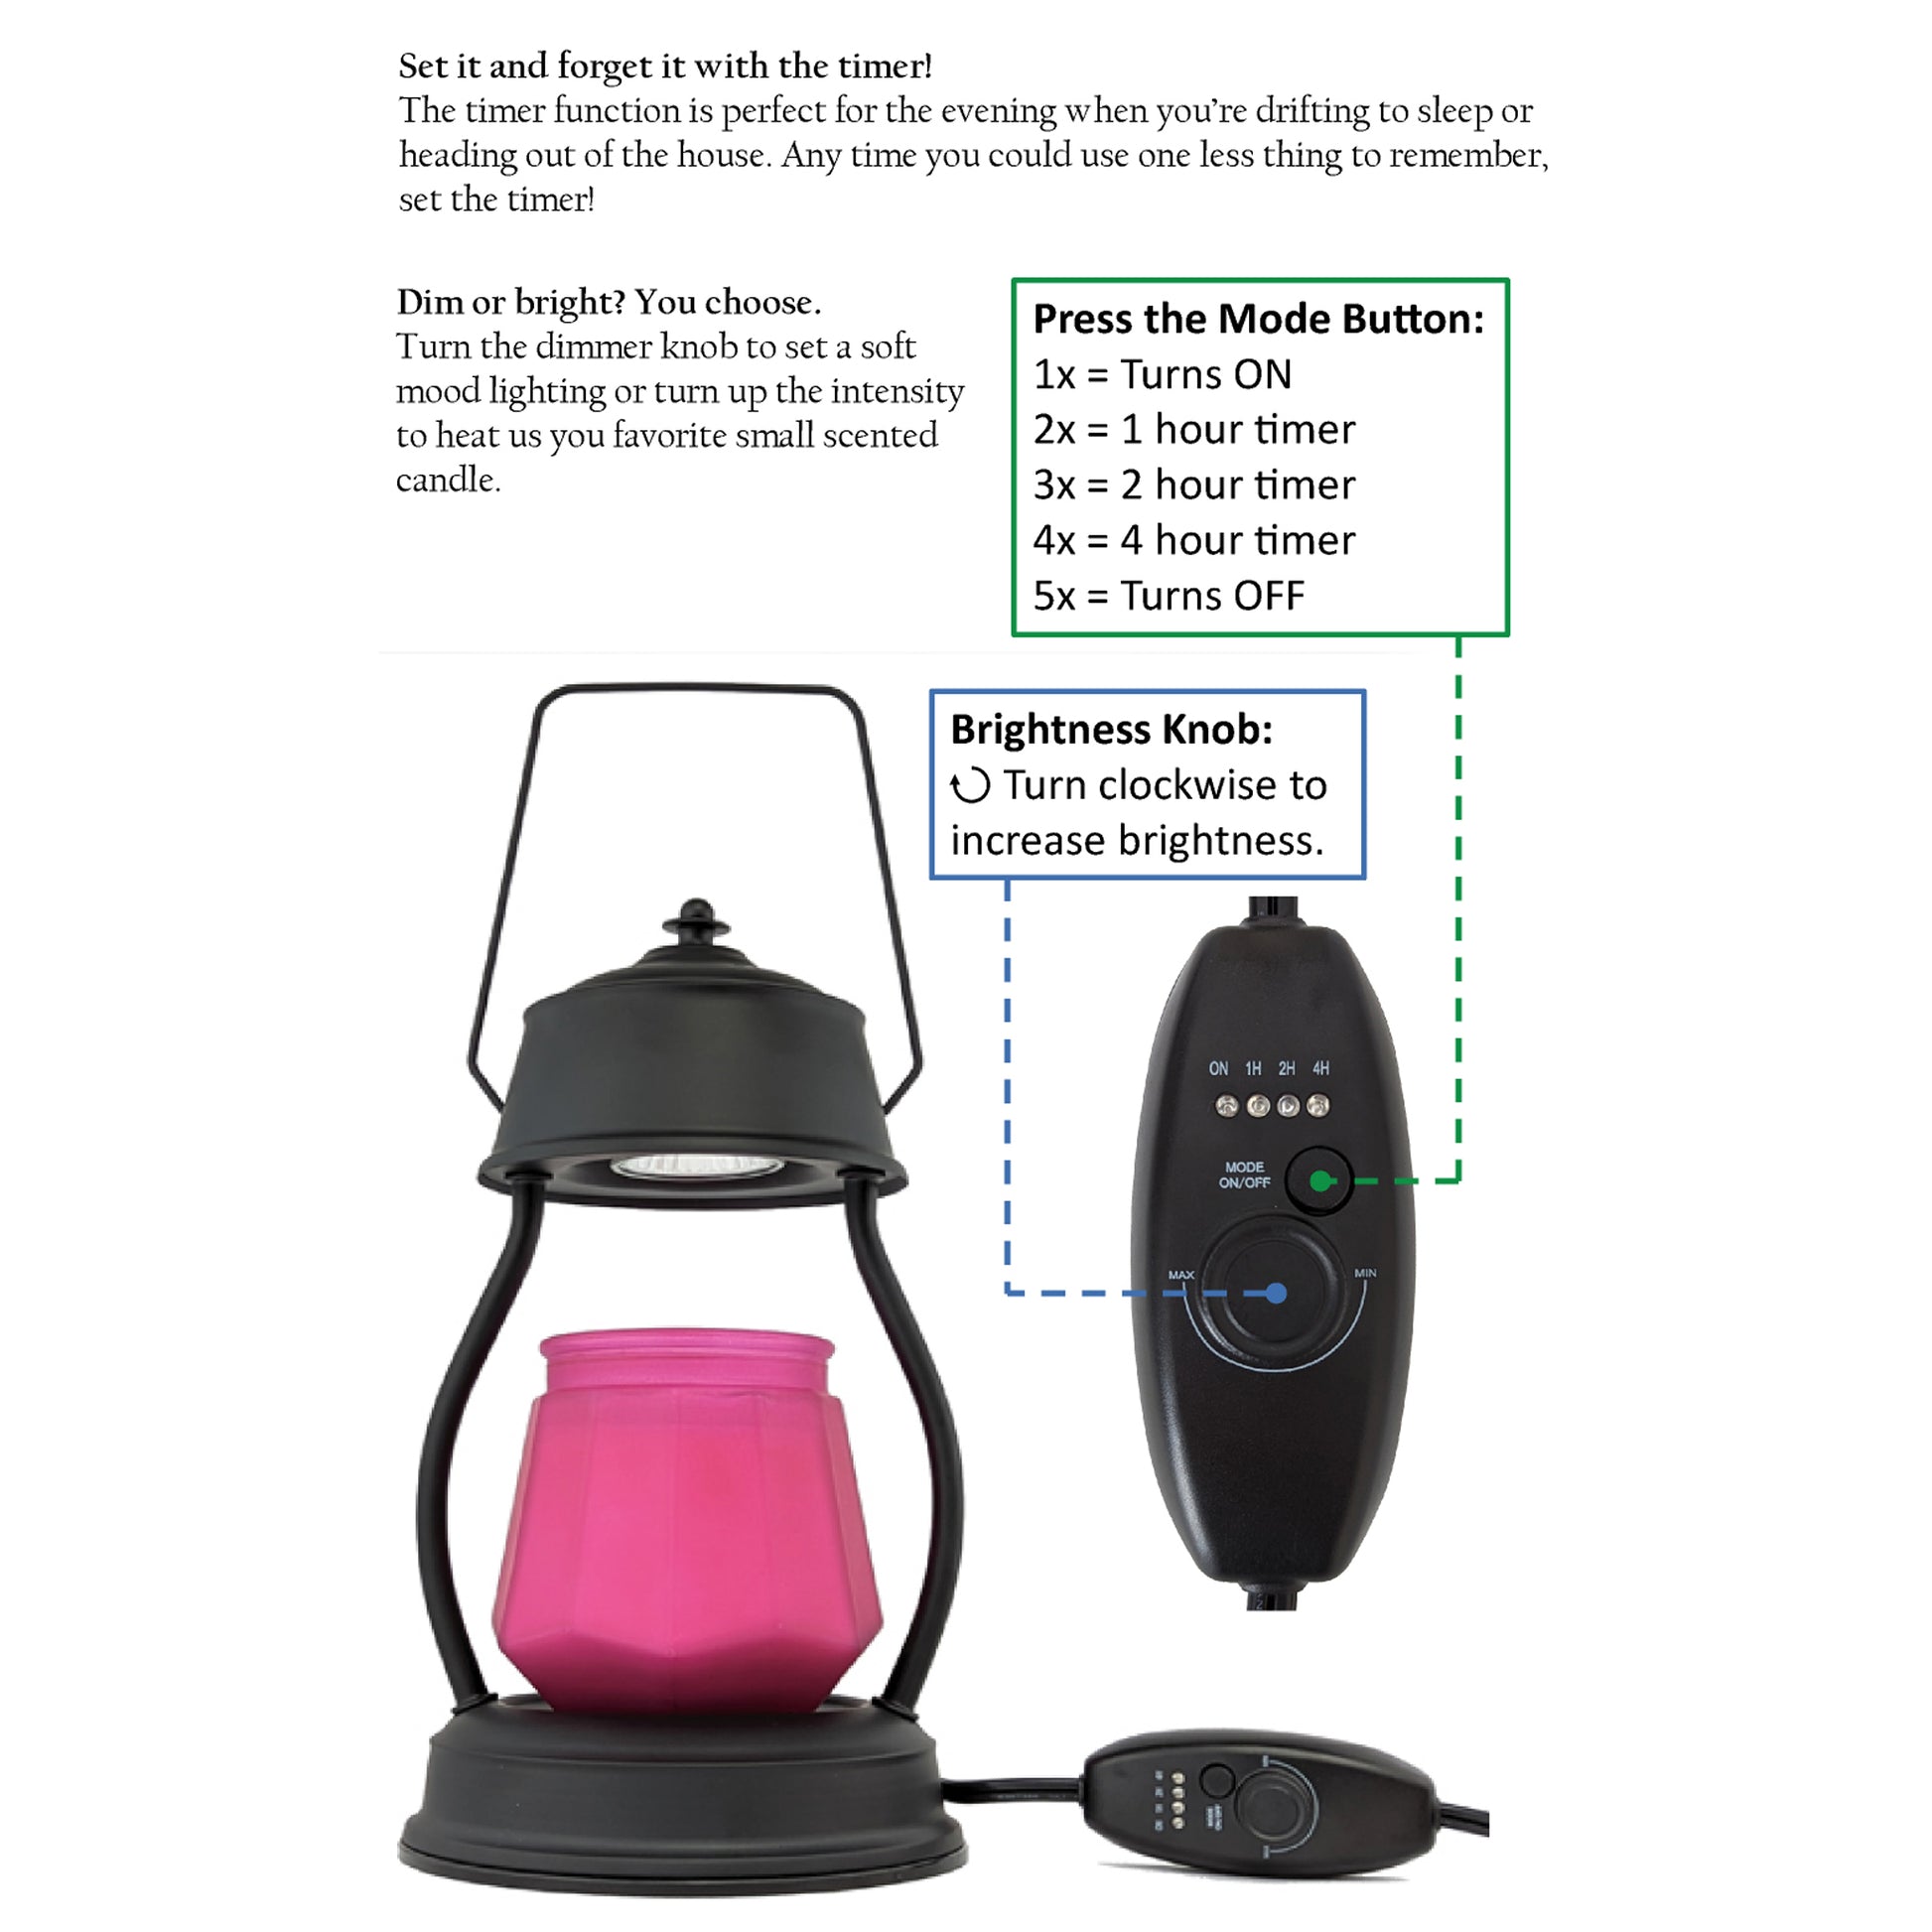 Infographic, black candle warmer with instructions on operating the on/off timer and dimmer knob function.